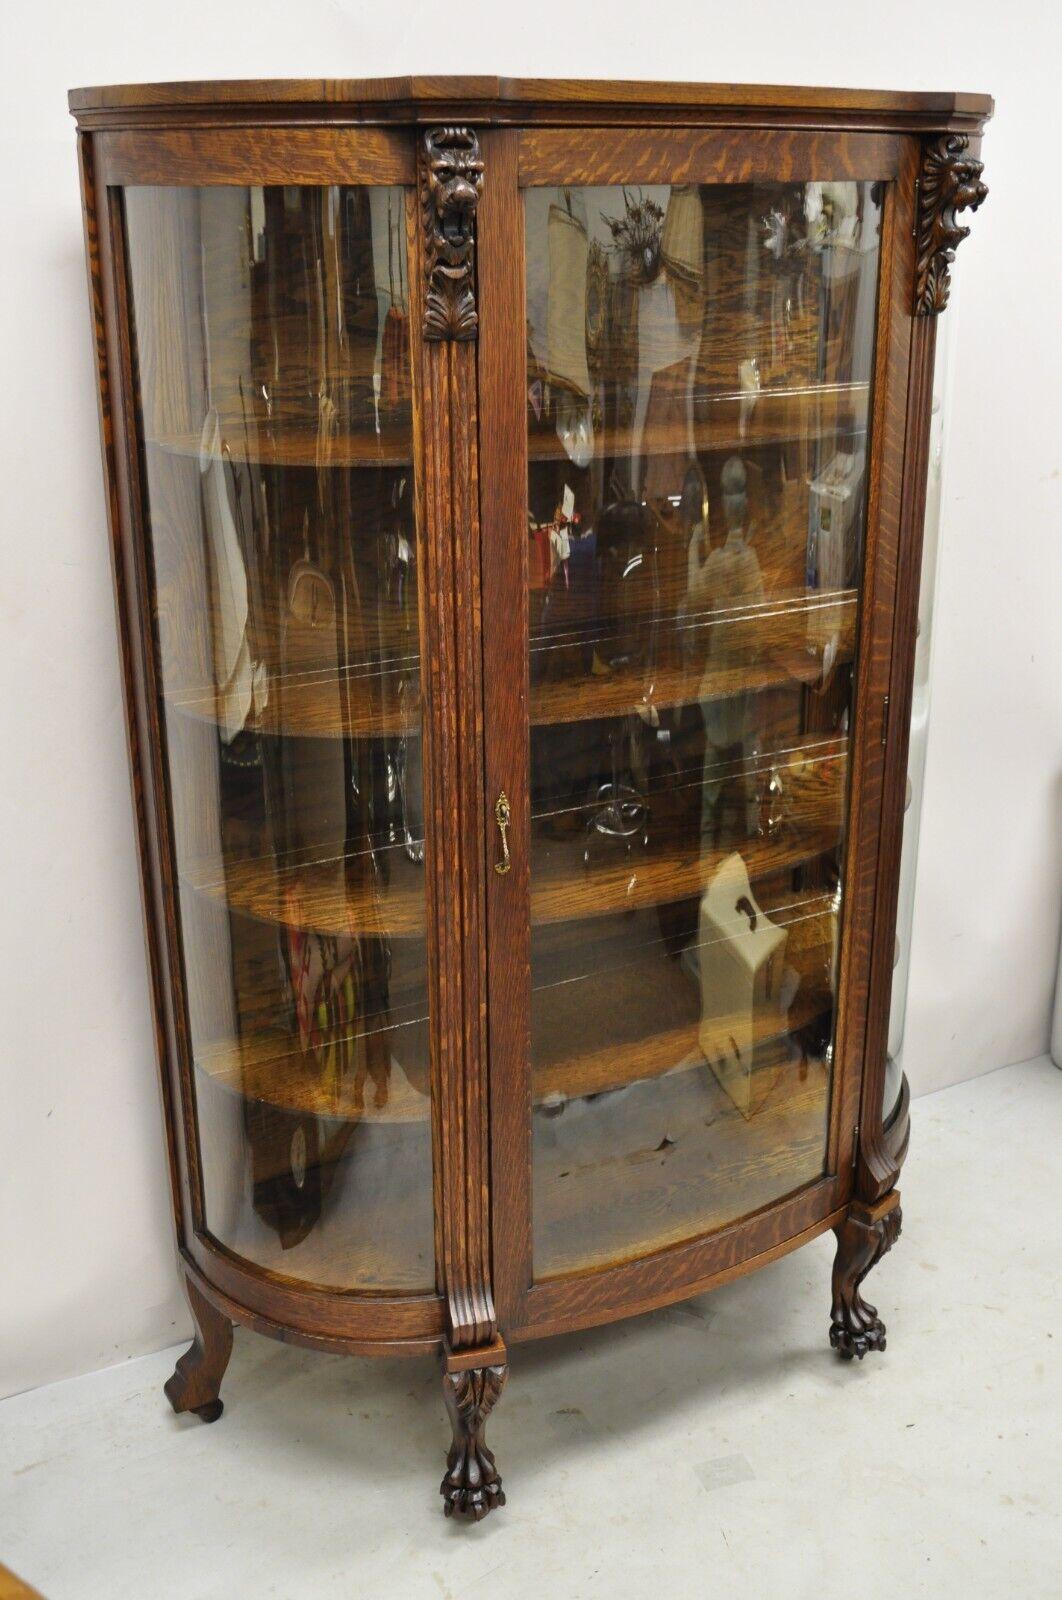 Antique American Empire Oak Carved Lion Head Paw Feet Bowed Glass China Cabinet. Item features a carved figured lion heads, carved paw feet, 3 panes of bowed glass, beautiful wood grain, working lock and key, 4 wooden shelves, very nice antique